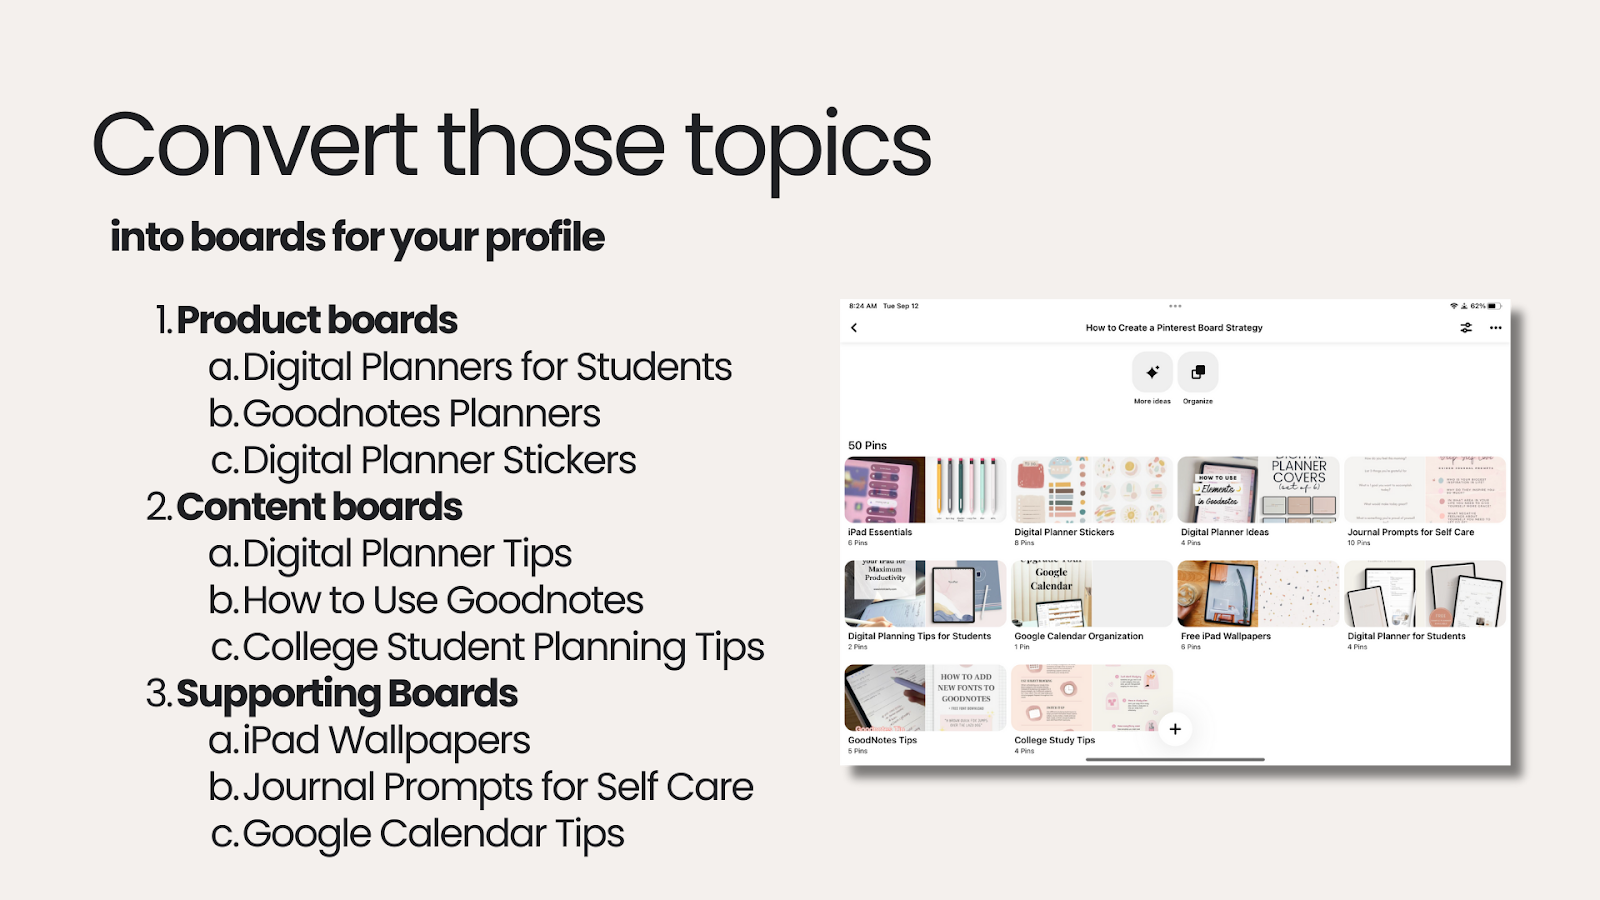 how to create a pinterest board strategy with all your content topics